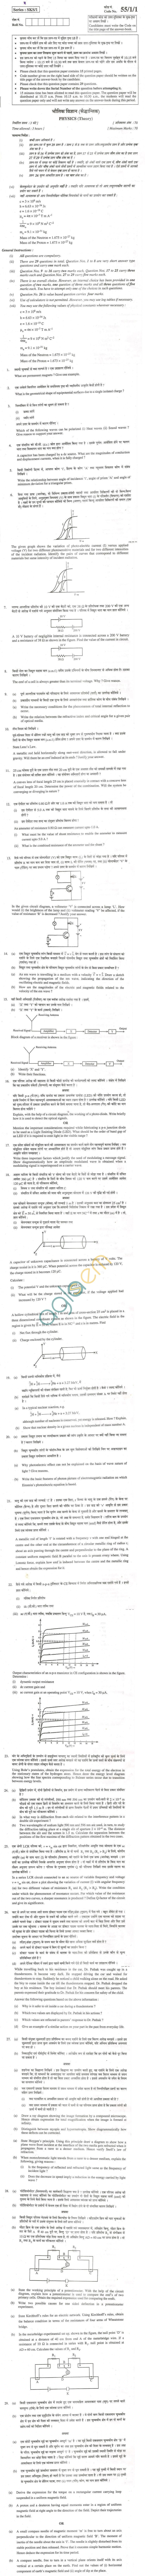 CBSE Board Exam 2013 Class XII Question Paper - Physics